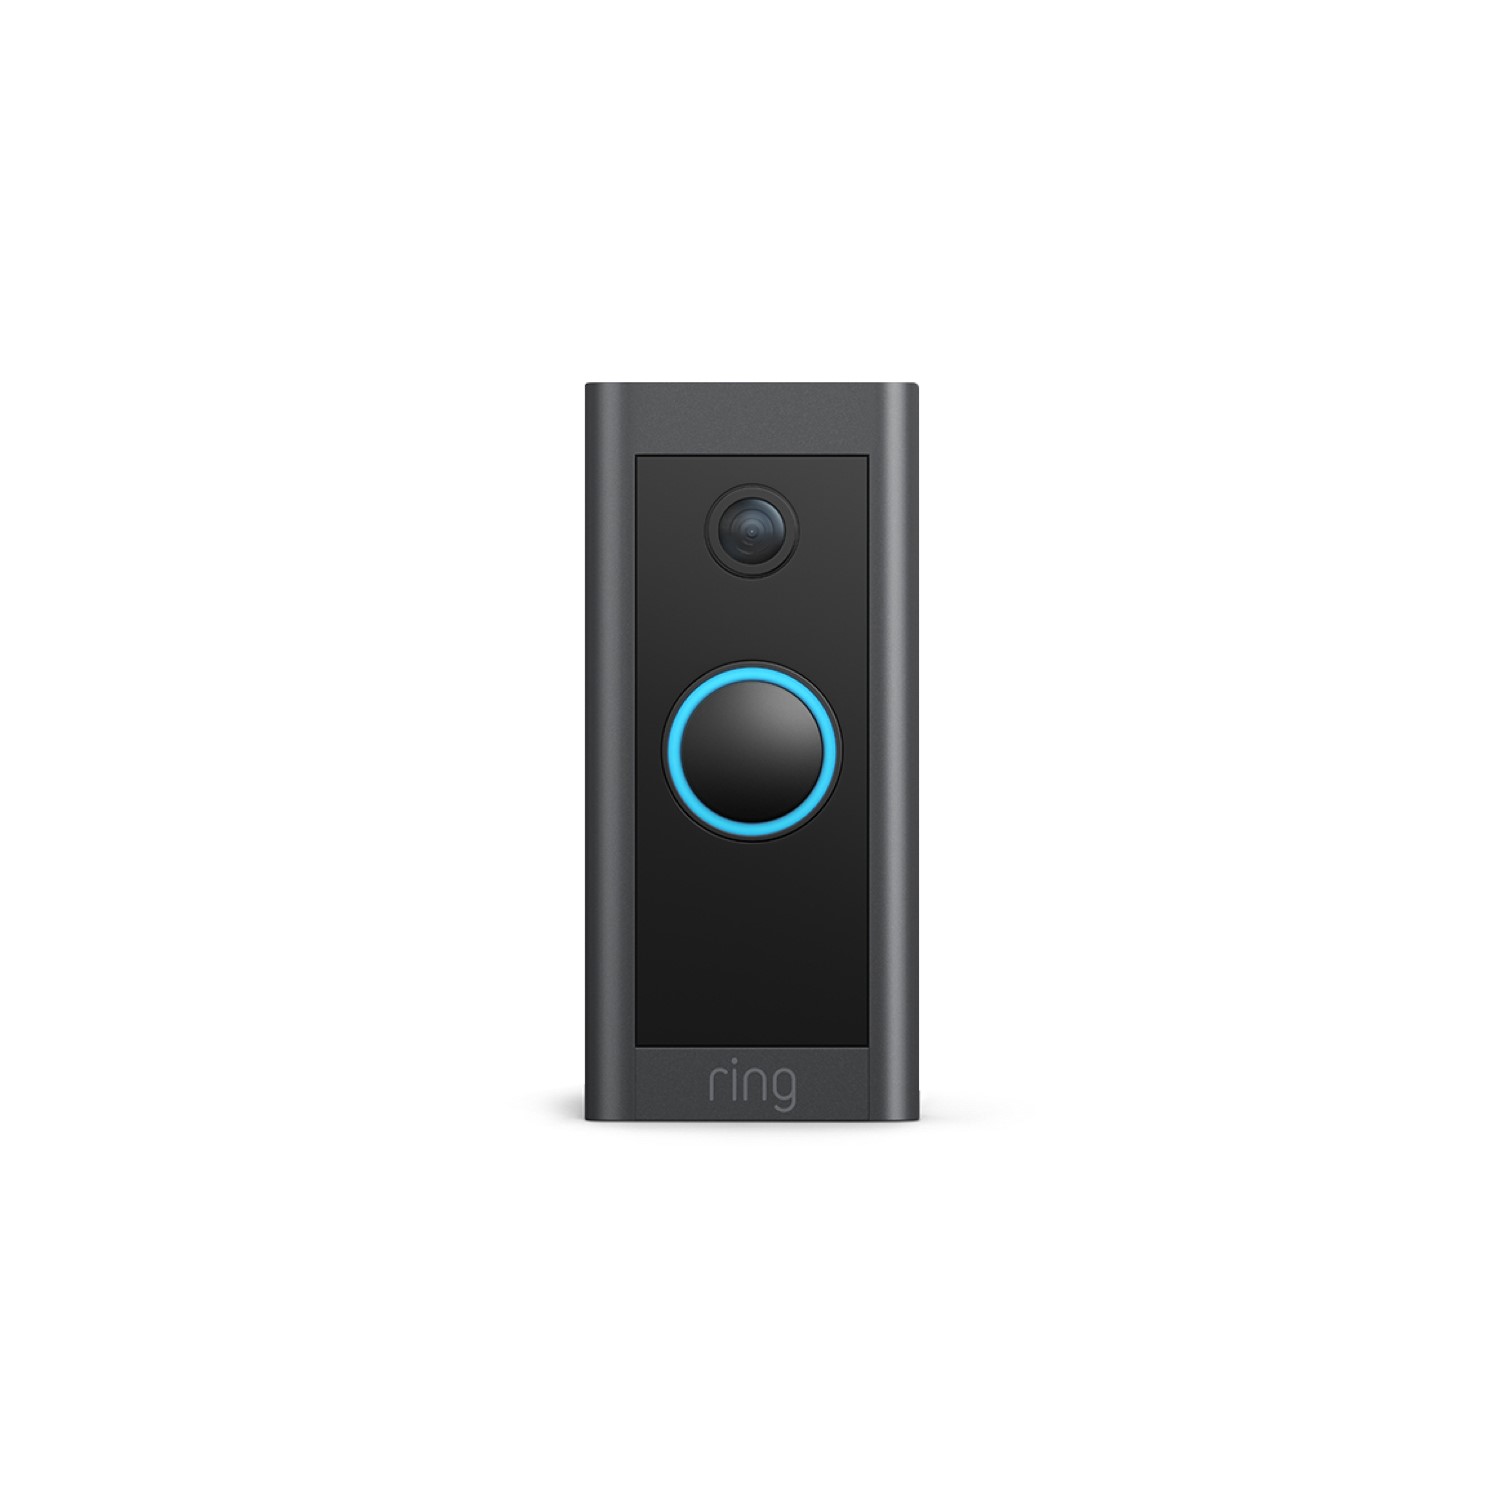 Ring 1080p HD Video Doorbell Wired - Black